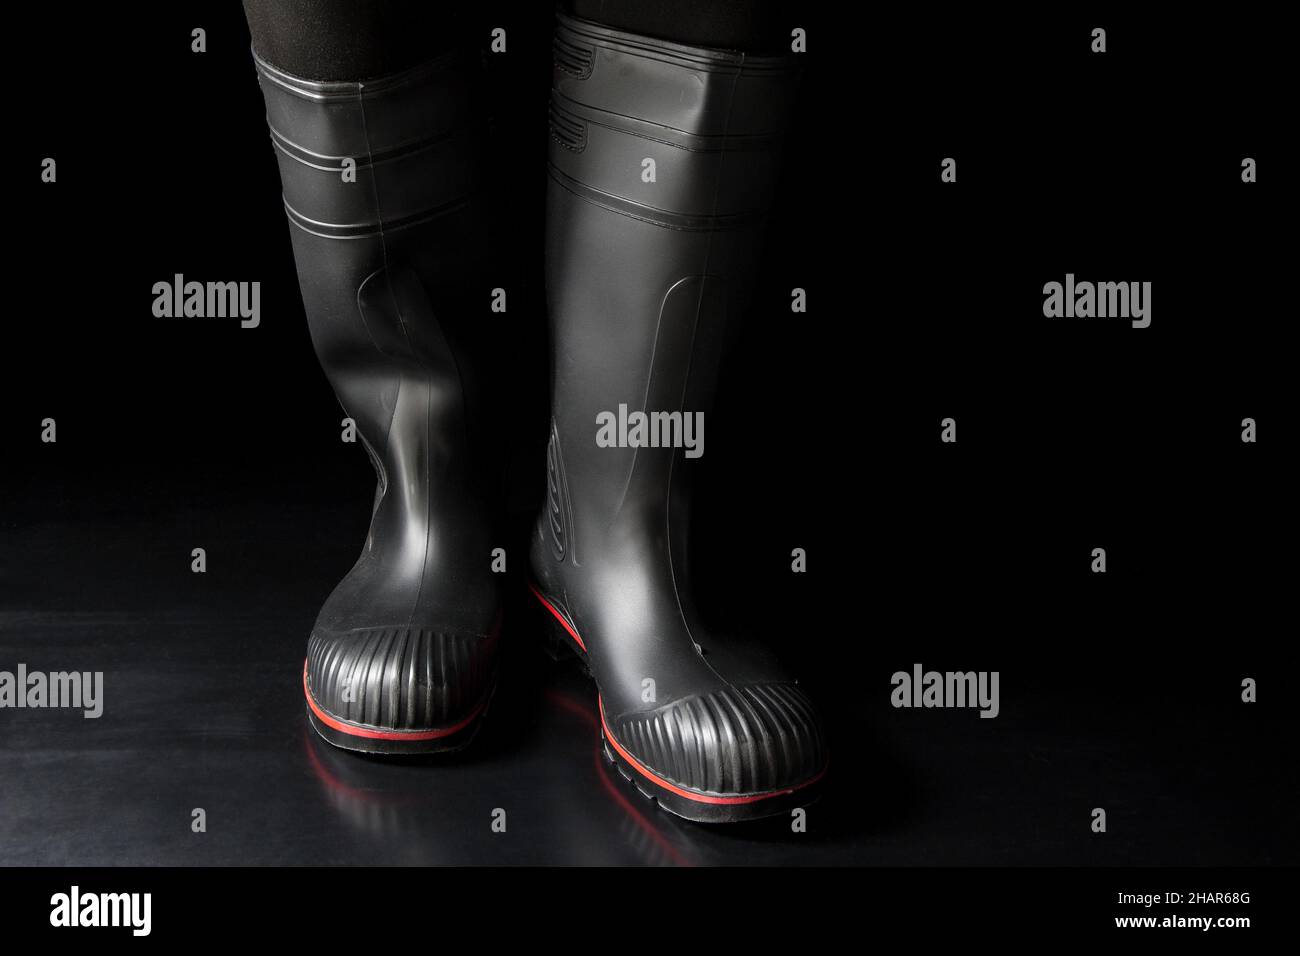 Black Friday for rubber boots. Black rubber boots against a black background. Stock Photo